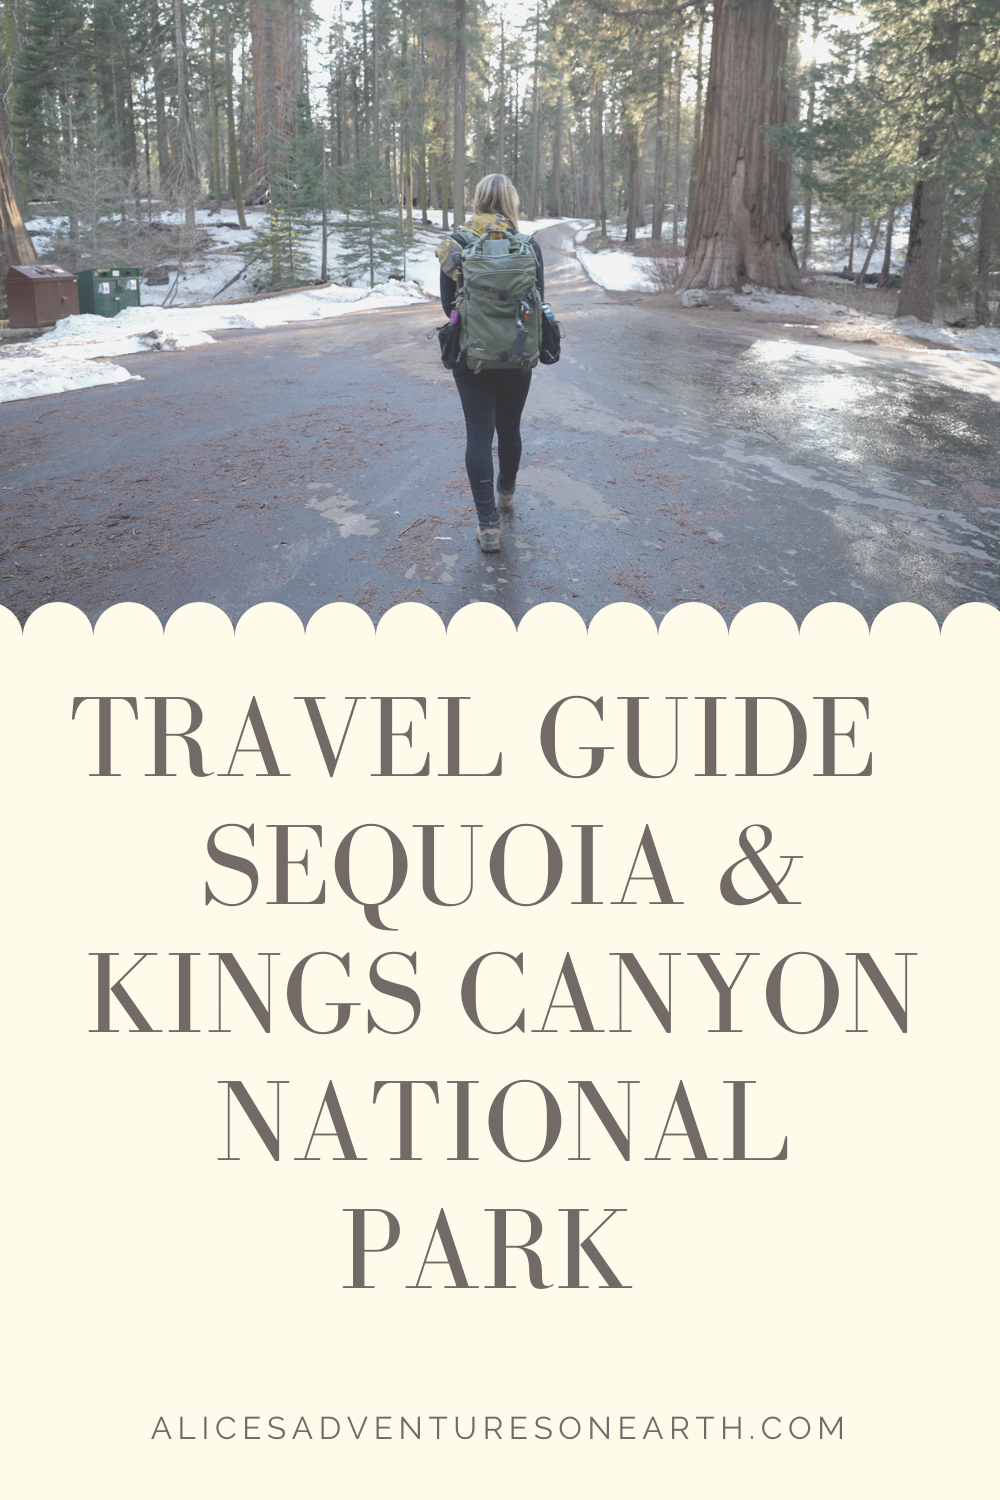 PLanning guide to Sequoia and kings canyon national park in California, what hikes to try, and where to go when in the park. #nationalparks #california 